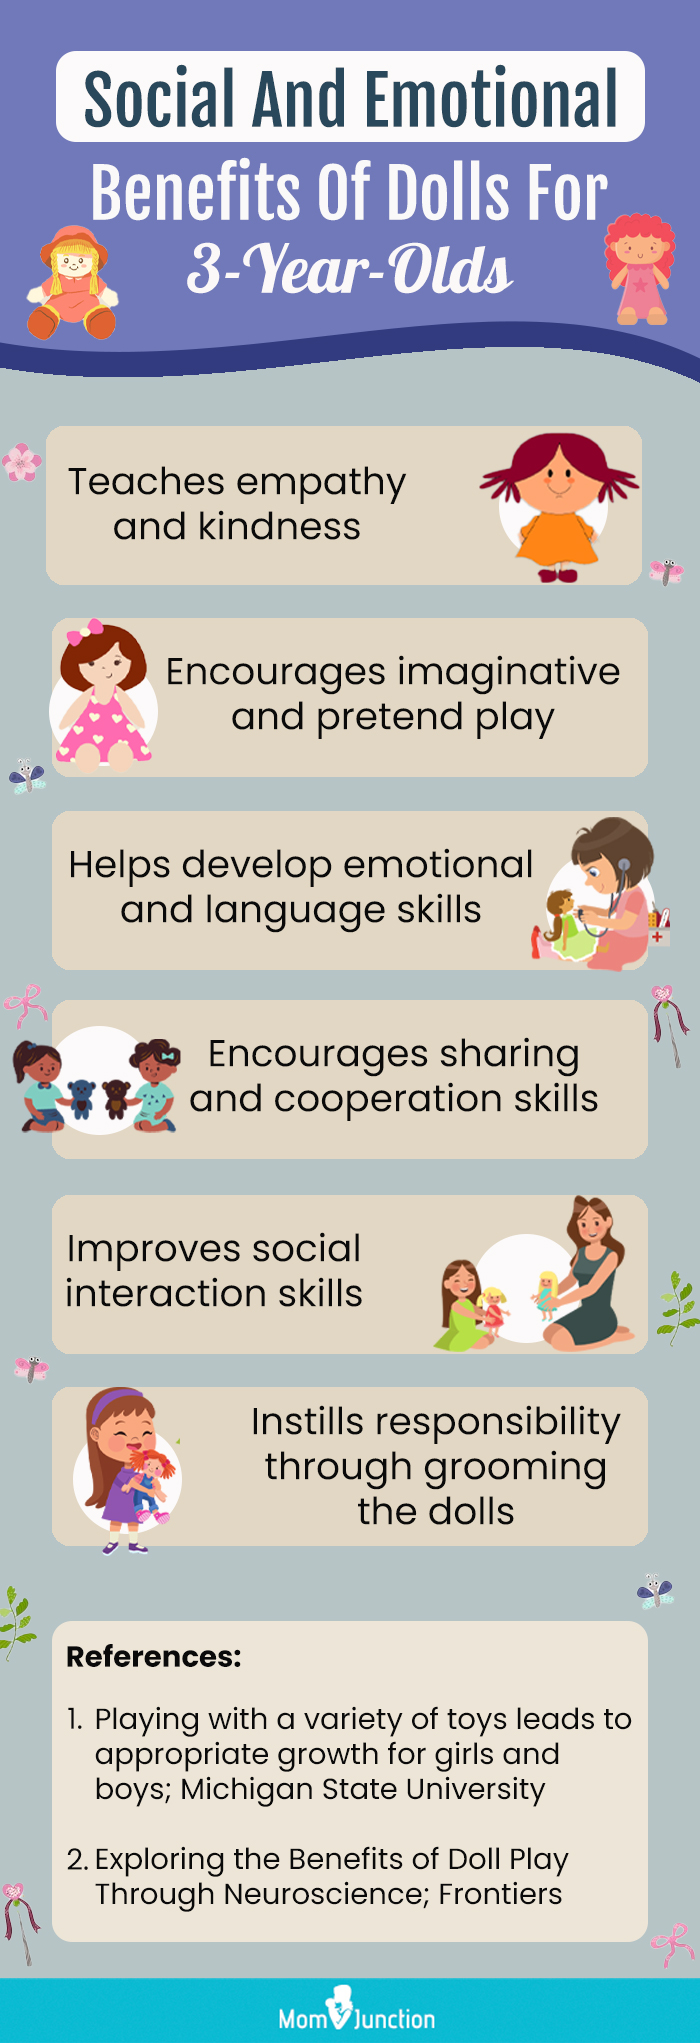 Social And Emotional Benefits Of Dolls For 3-Year-Olds [infographic]